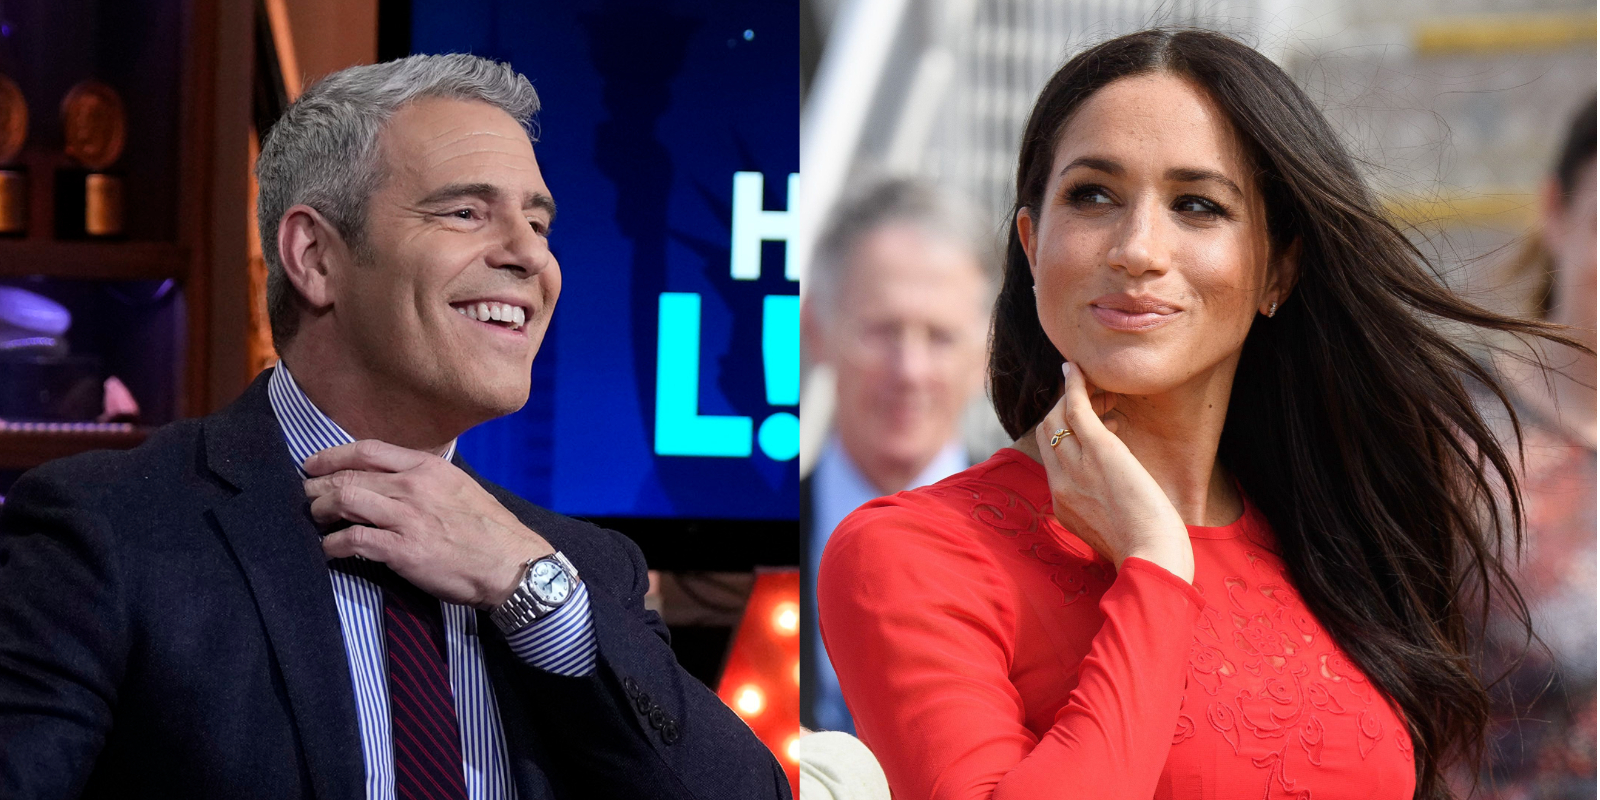 Andy Cohen and Meghan Markle in side by side photographs.